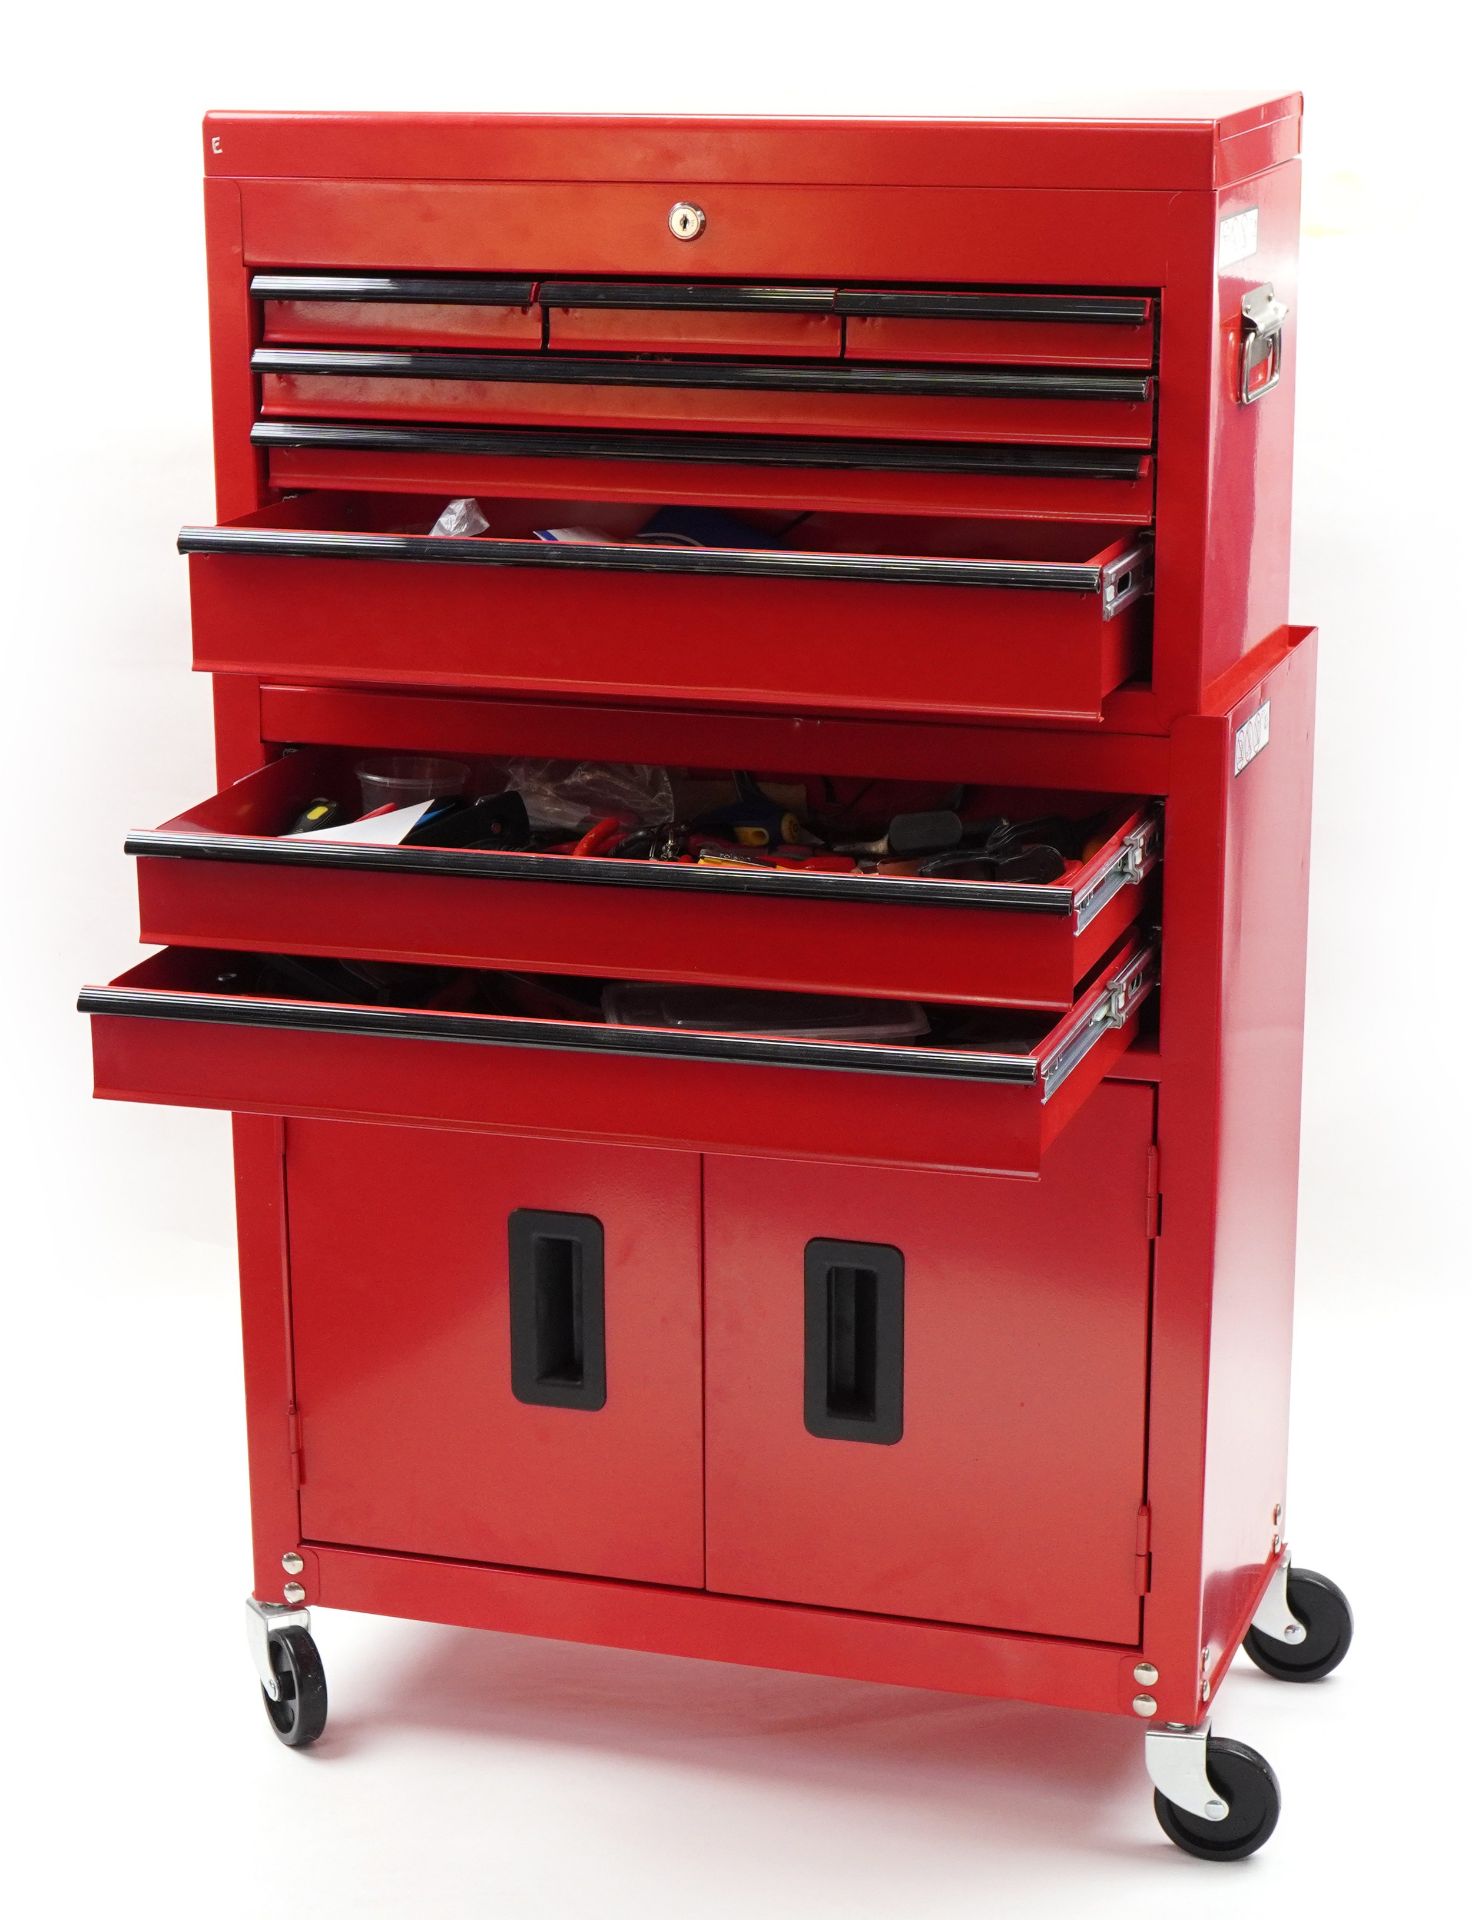 Large collection of model making precision tools housed in a portable metal tool cabinet, 103cm H - Bild 2 aus 8